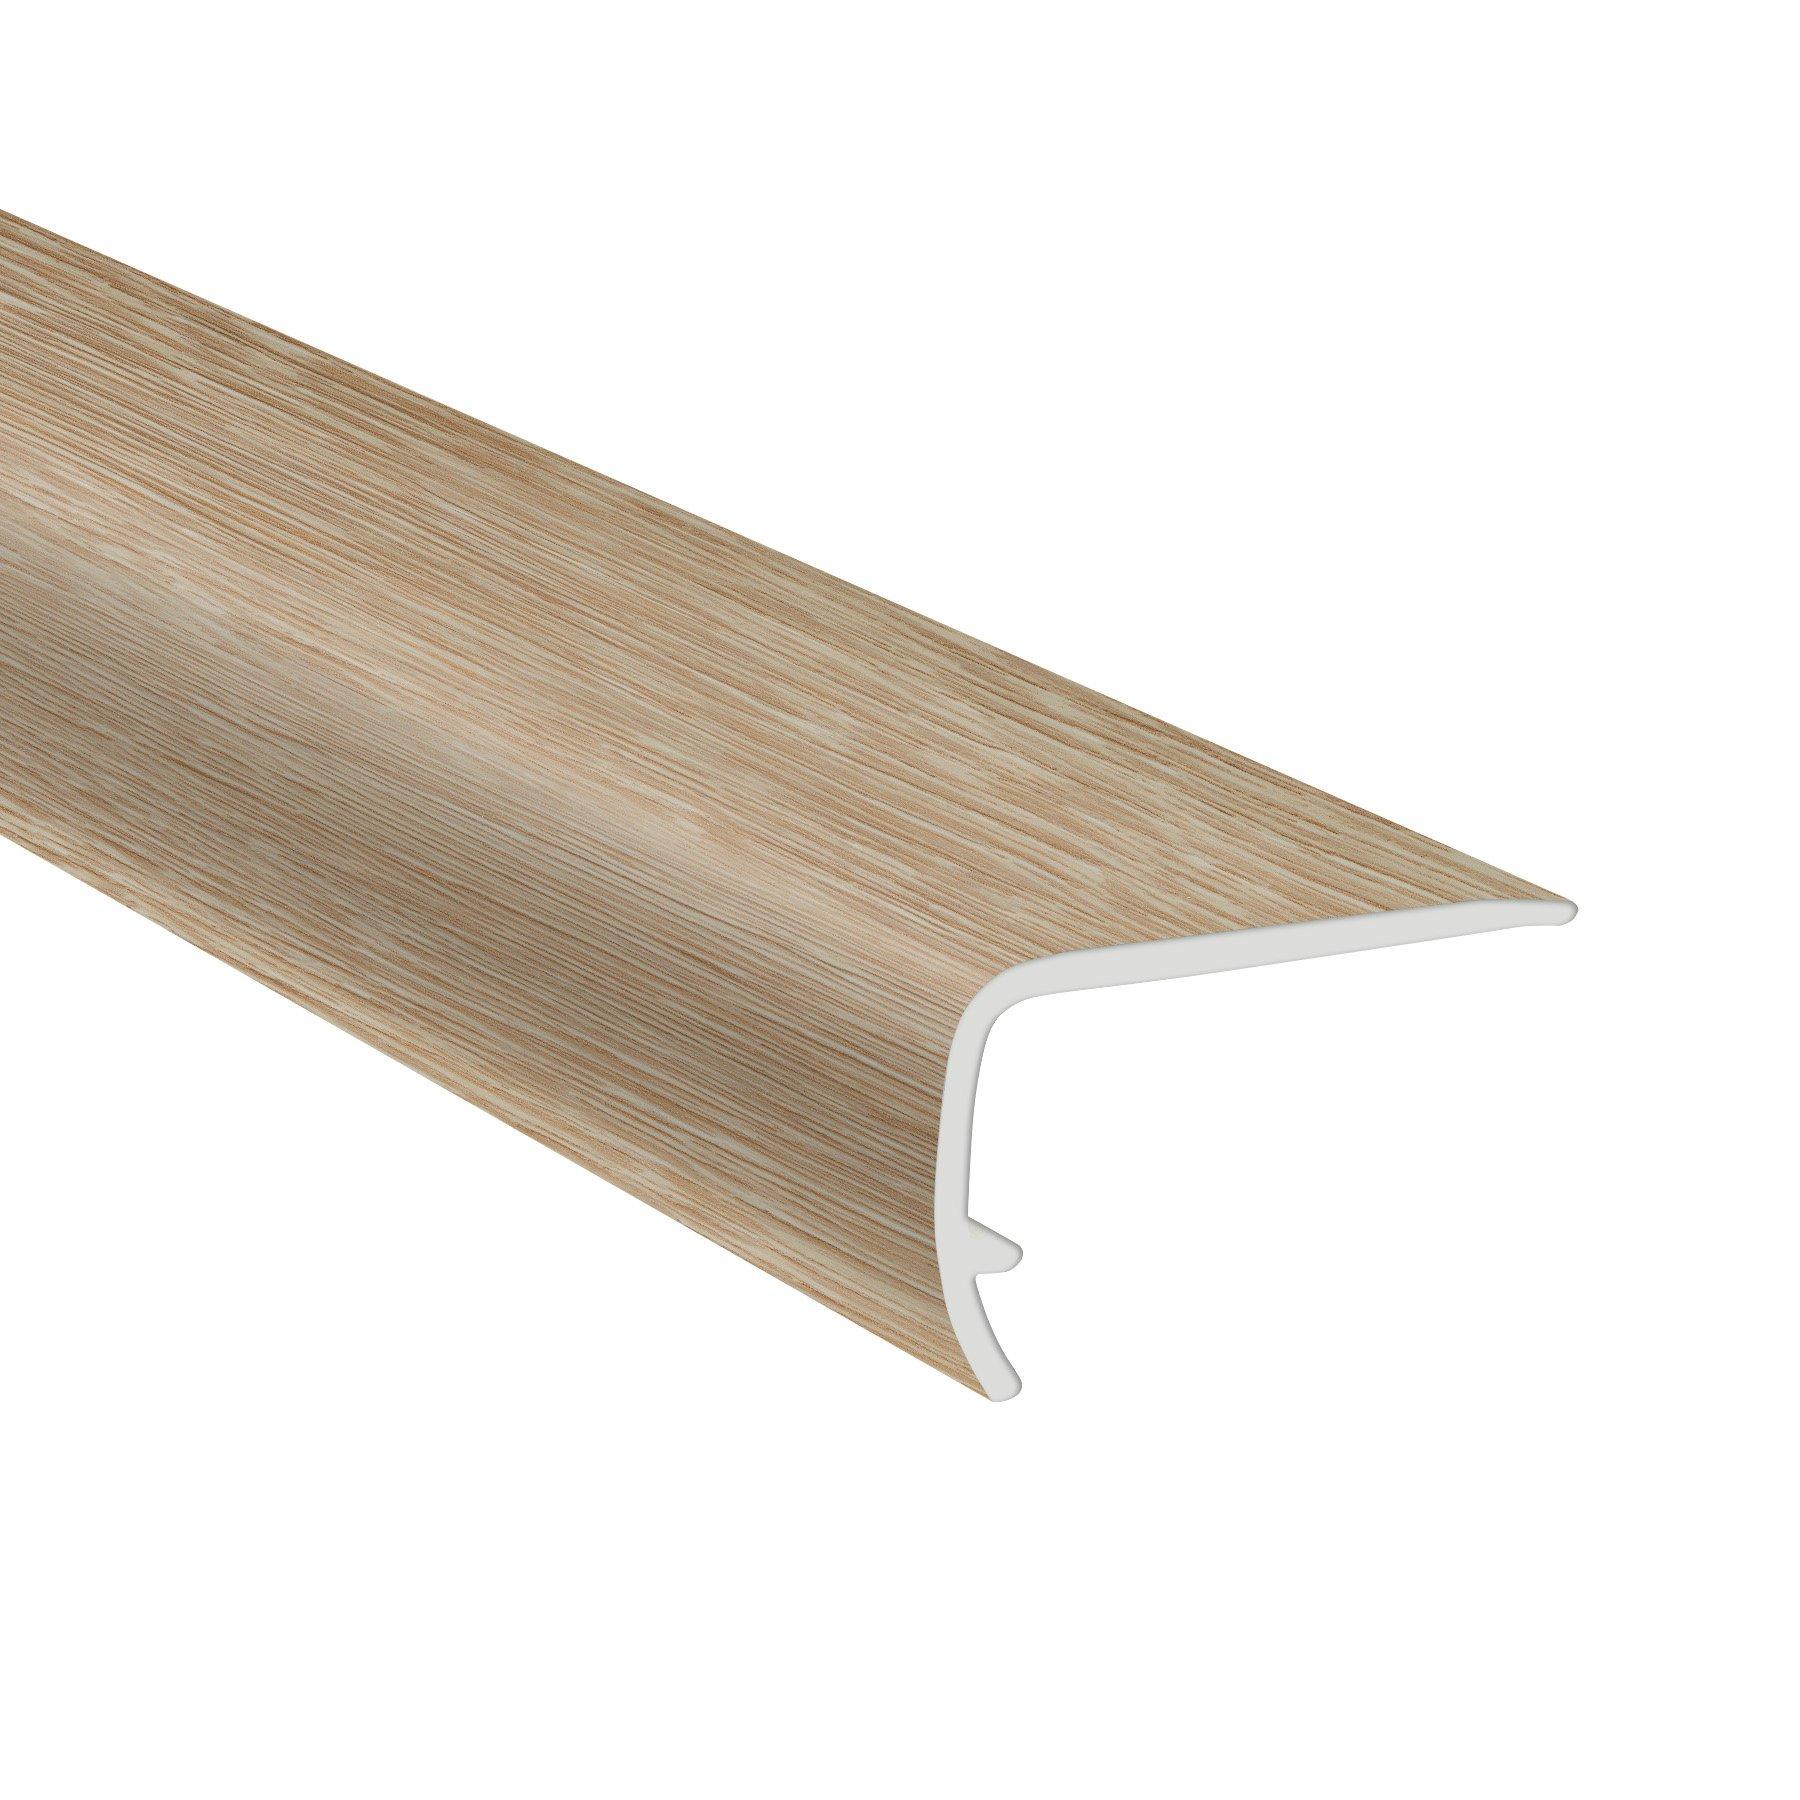 Big Sky 94in. Vinyl Overlapping Stair Nose